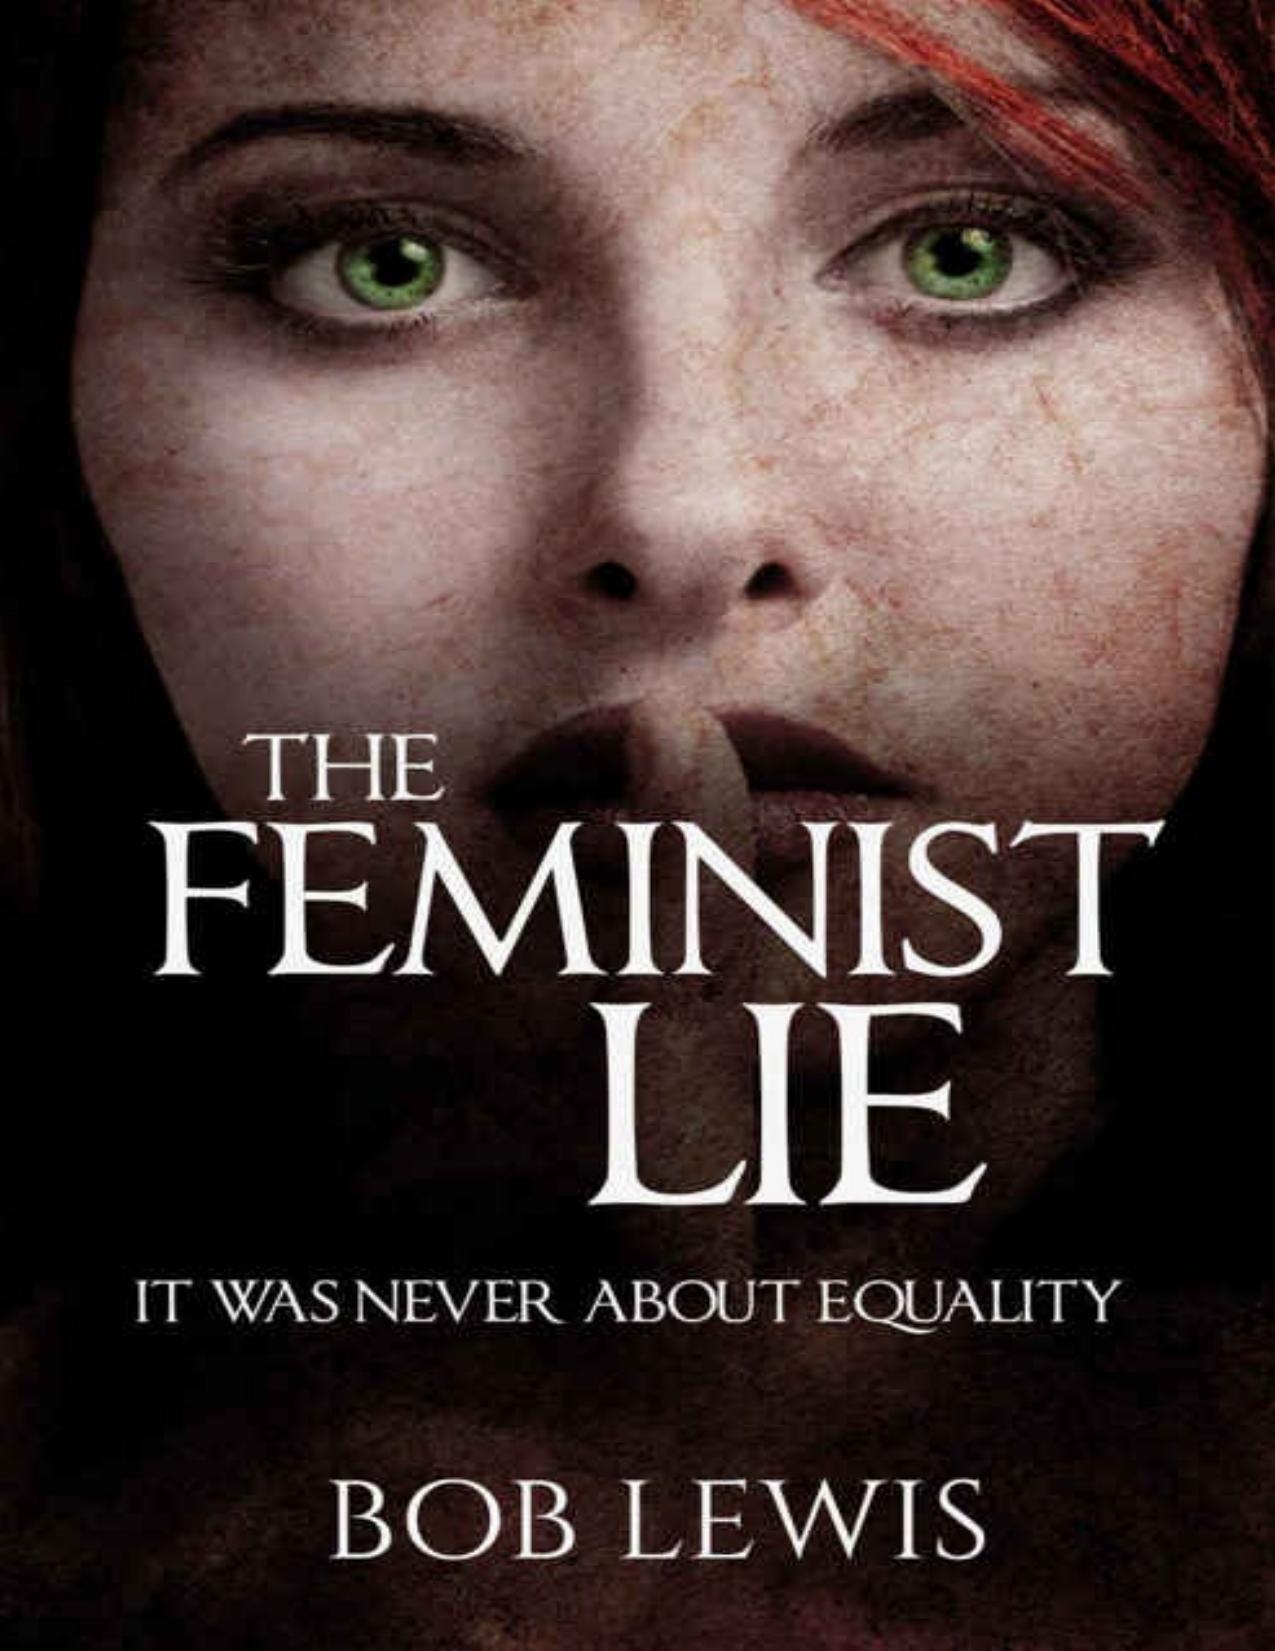 The Feminist Lie - It Was Never About Equality - PDFDrive.com